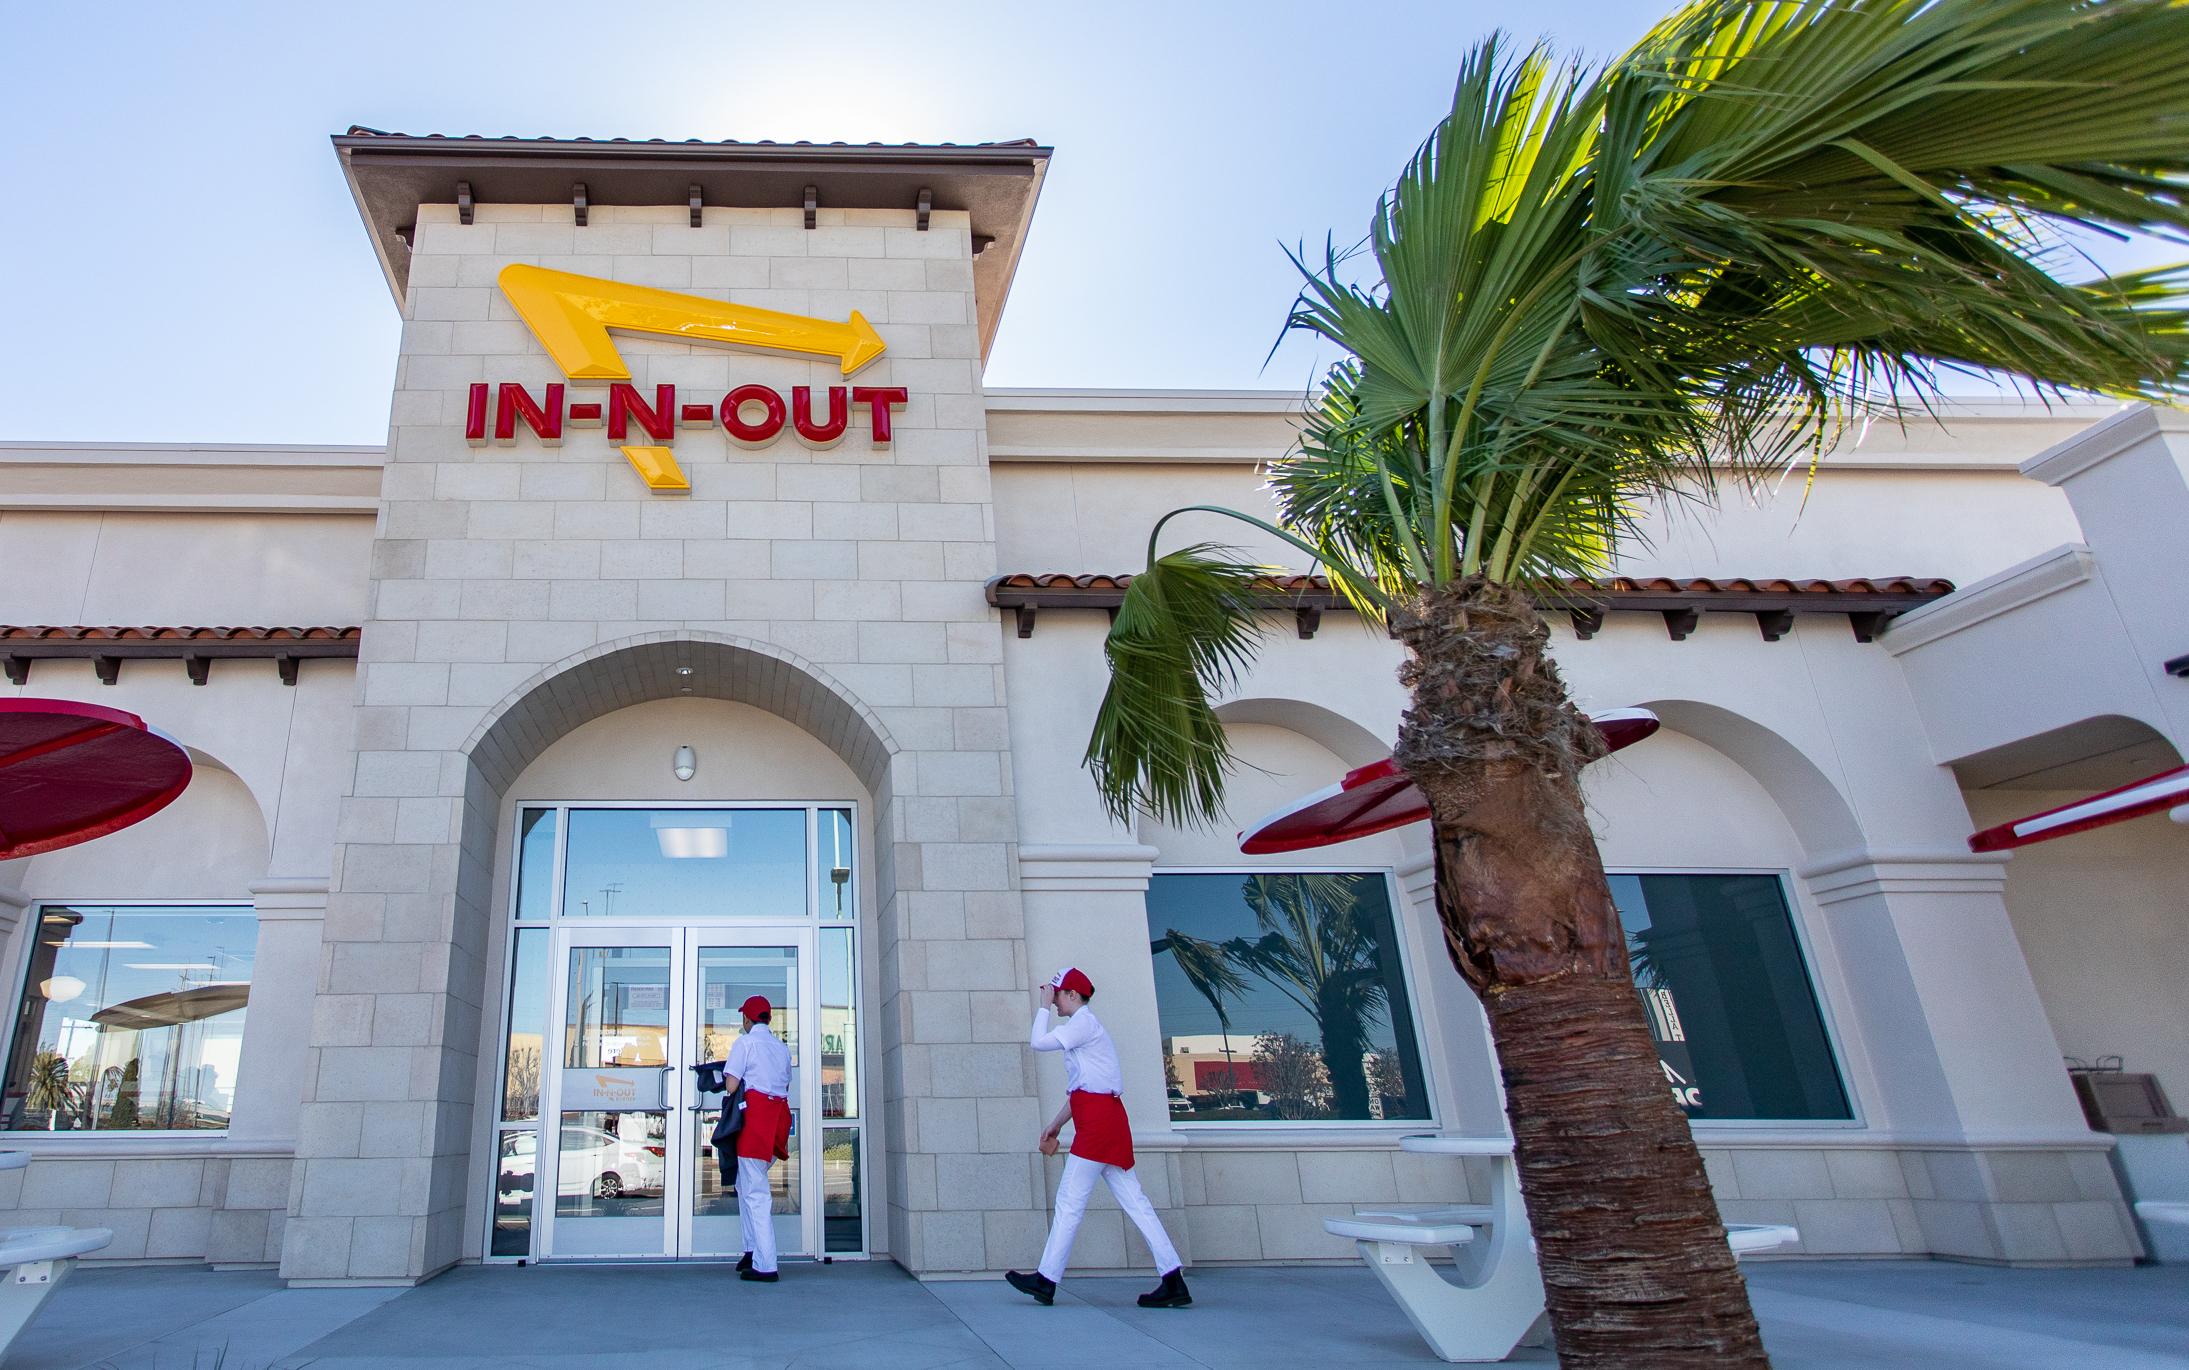 In-N-Out to Add 4 New Stores in California, Expand in Other States